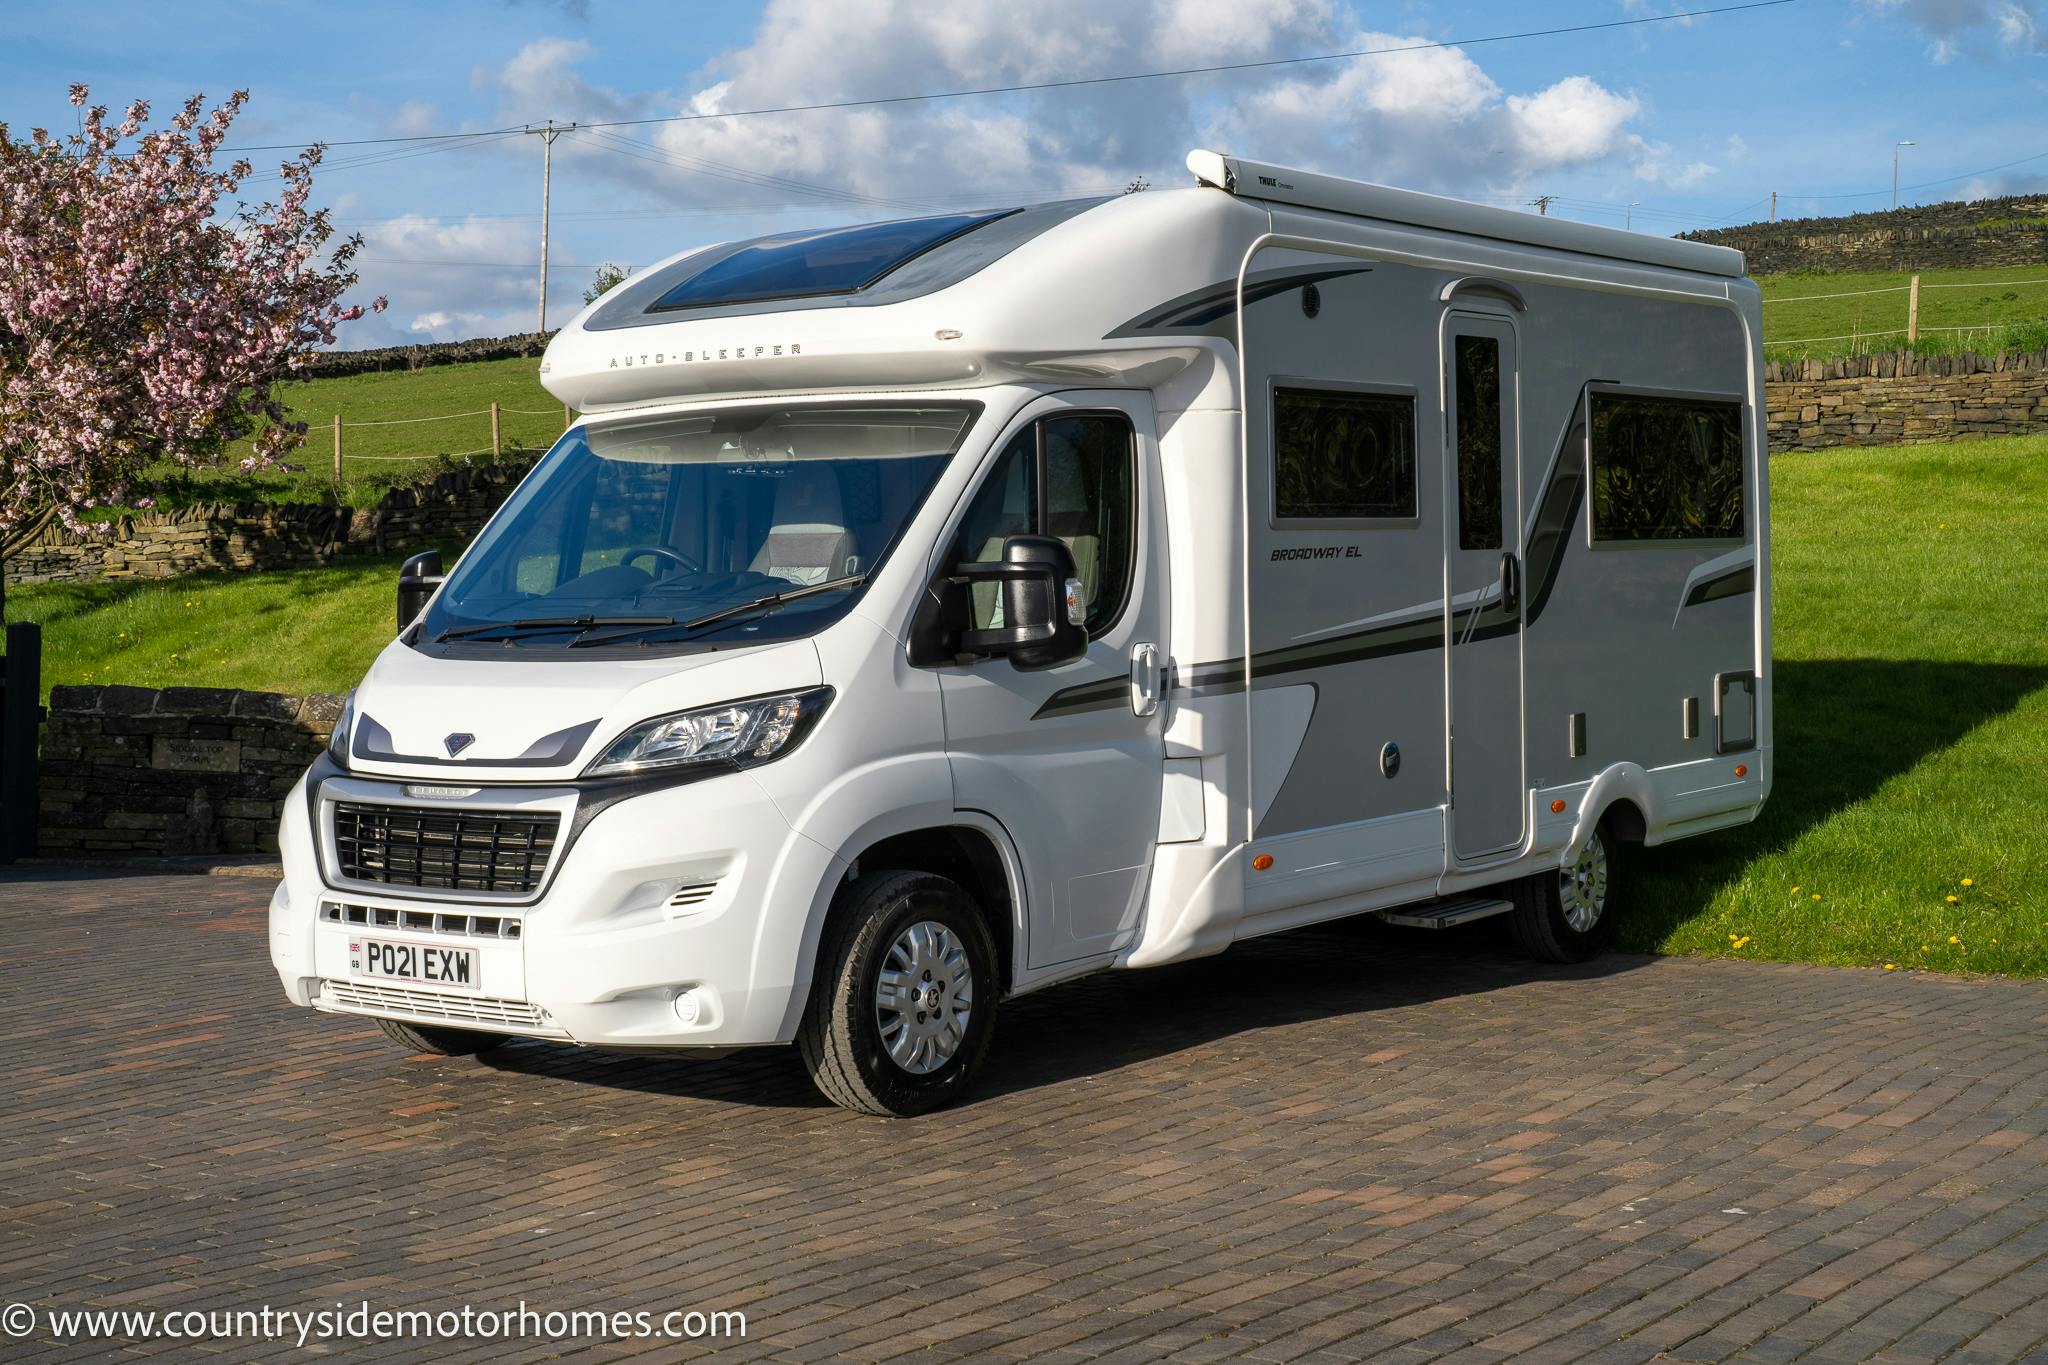 A modern white 2021 Auto-Sleepers Broadway EL motorhome with a UK license plate is parked on a paved area. The vehicle has large windows, a sleek design with grey accents, and solar panels on the roof. The background features a grassy area, blooming tree, stone wall, and blue sky with clouds.